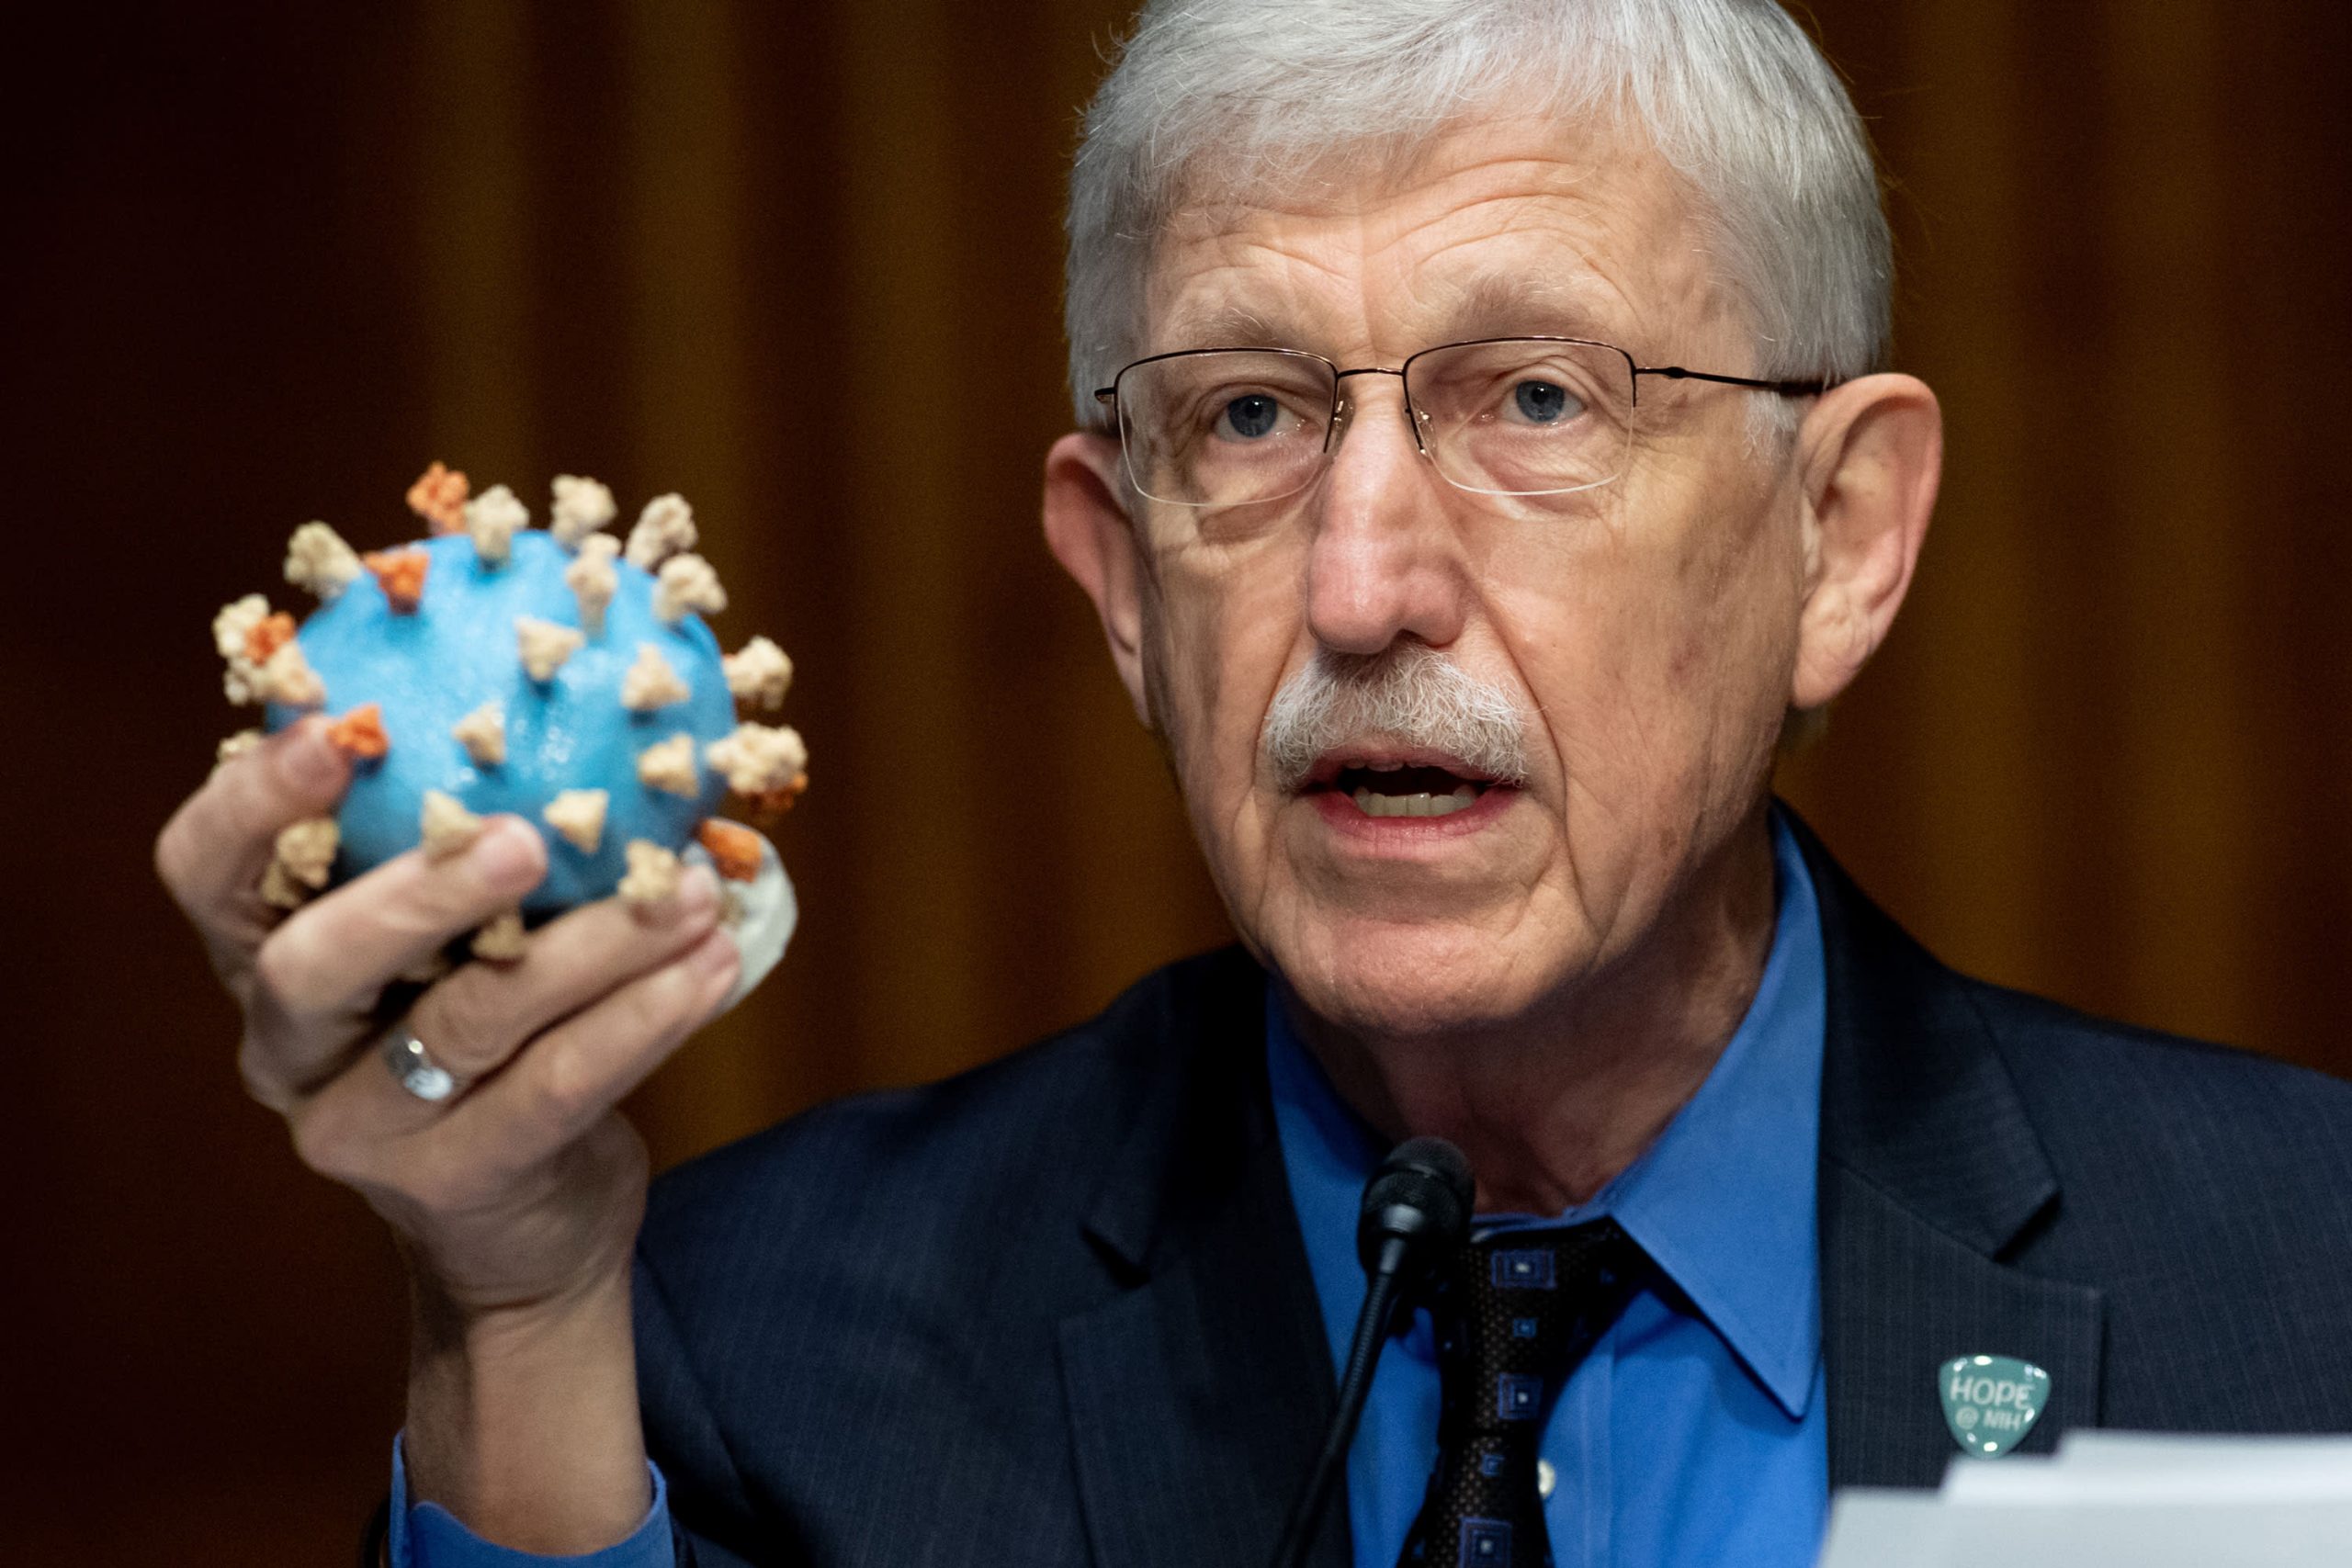 Why Covid vaccine is ‘extra like a tetanus shot,’ says NIH Director